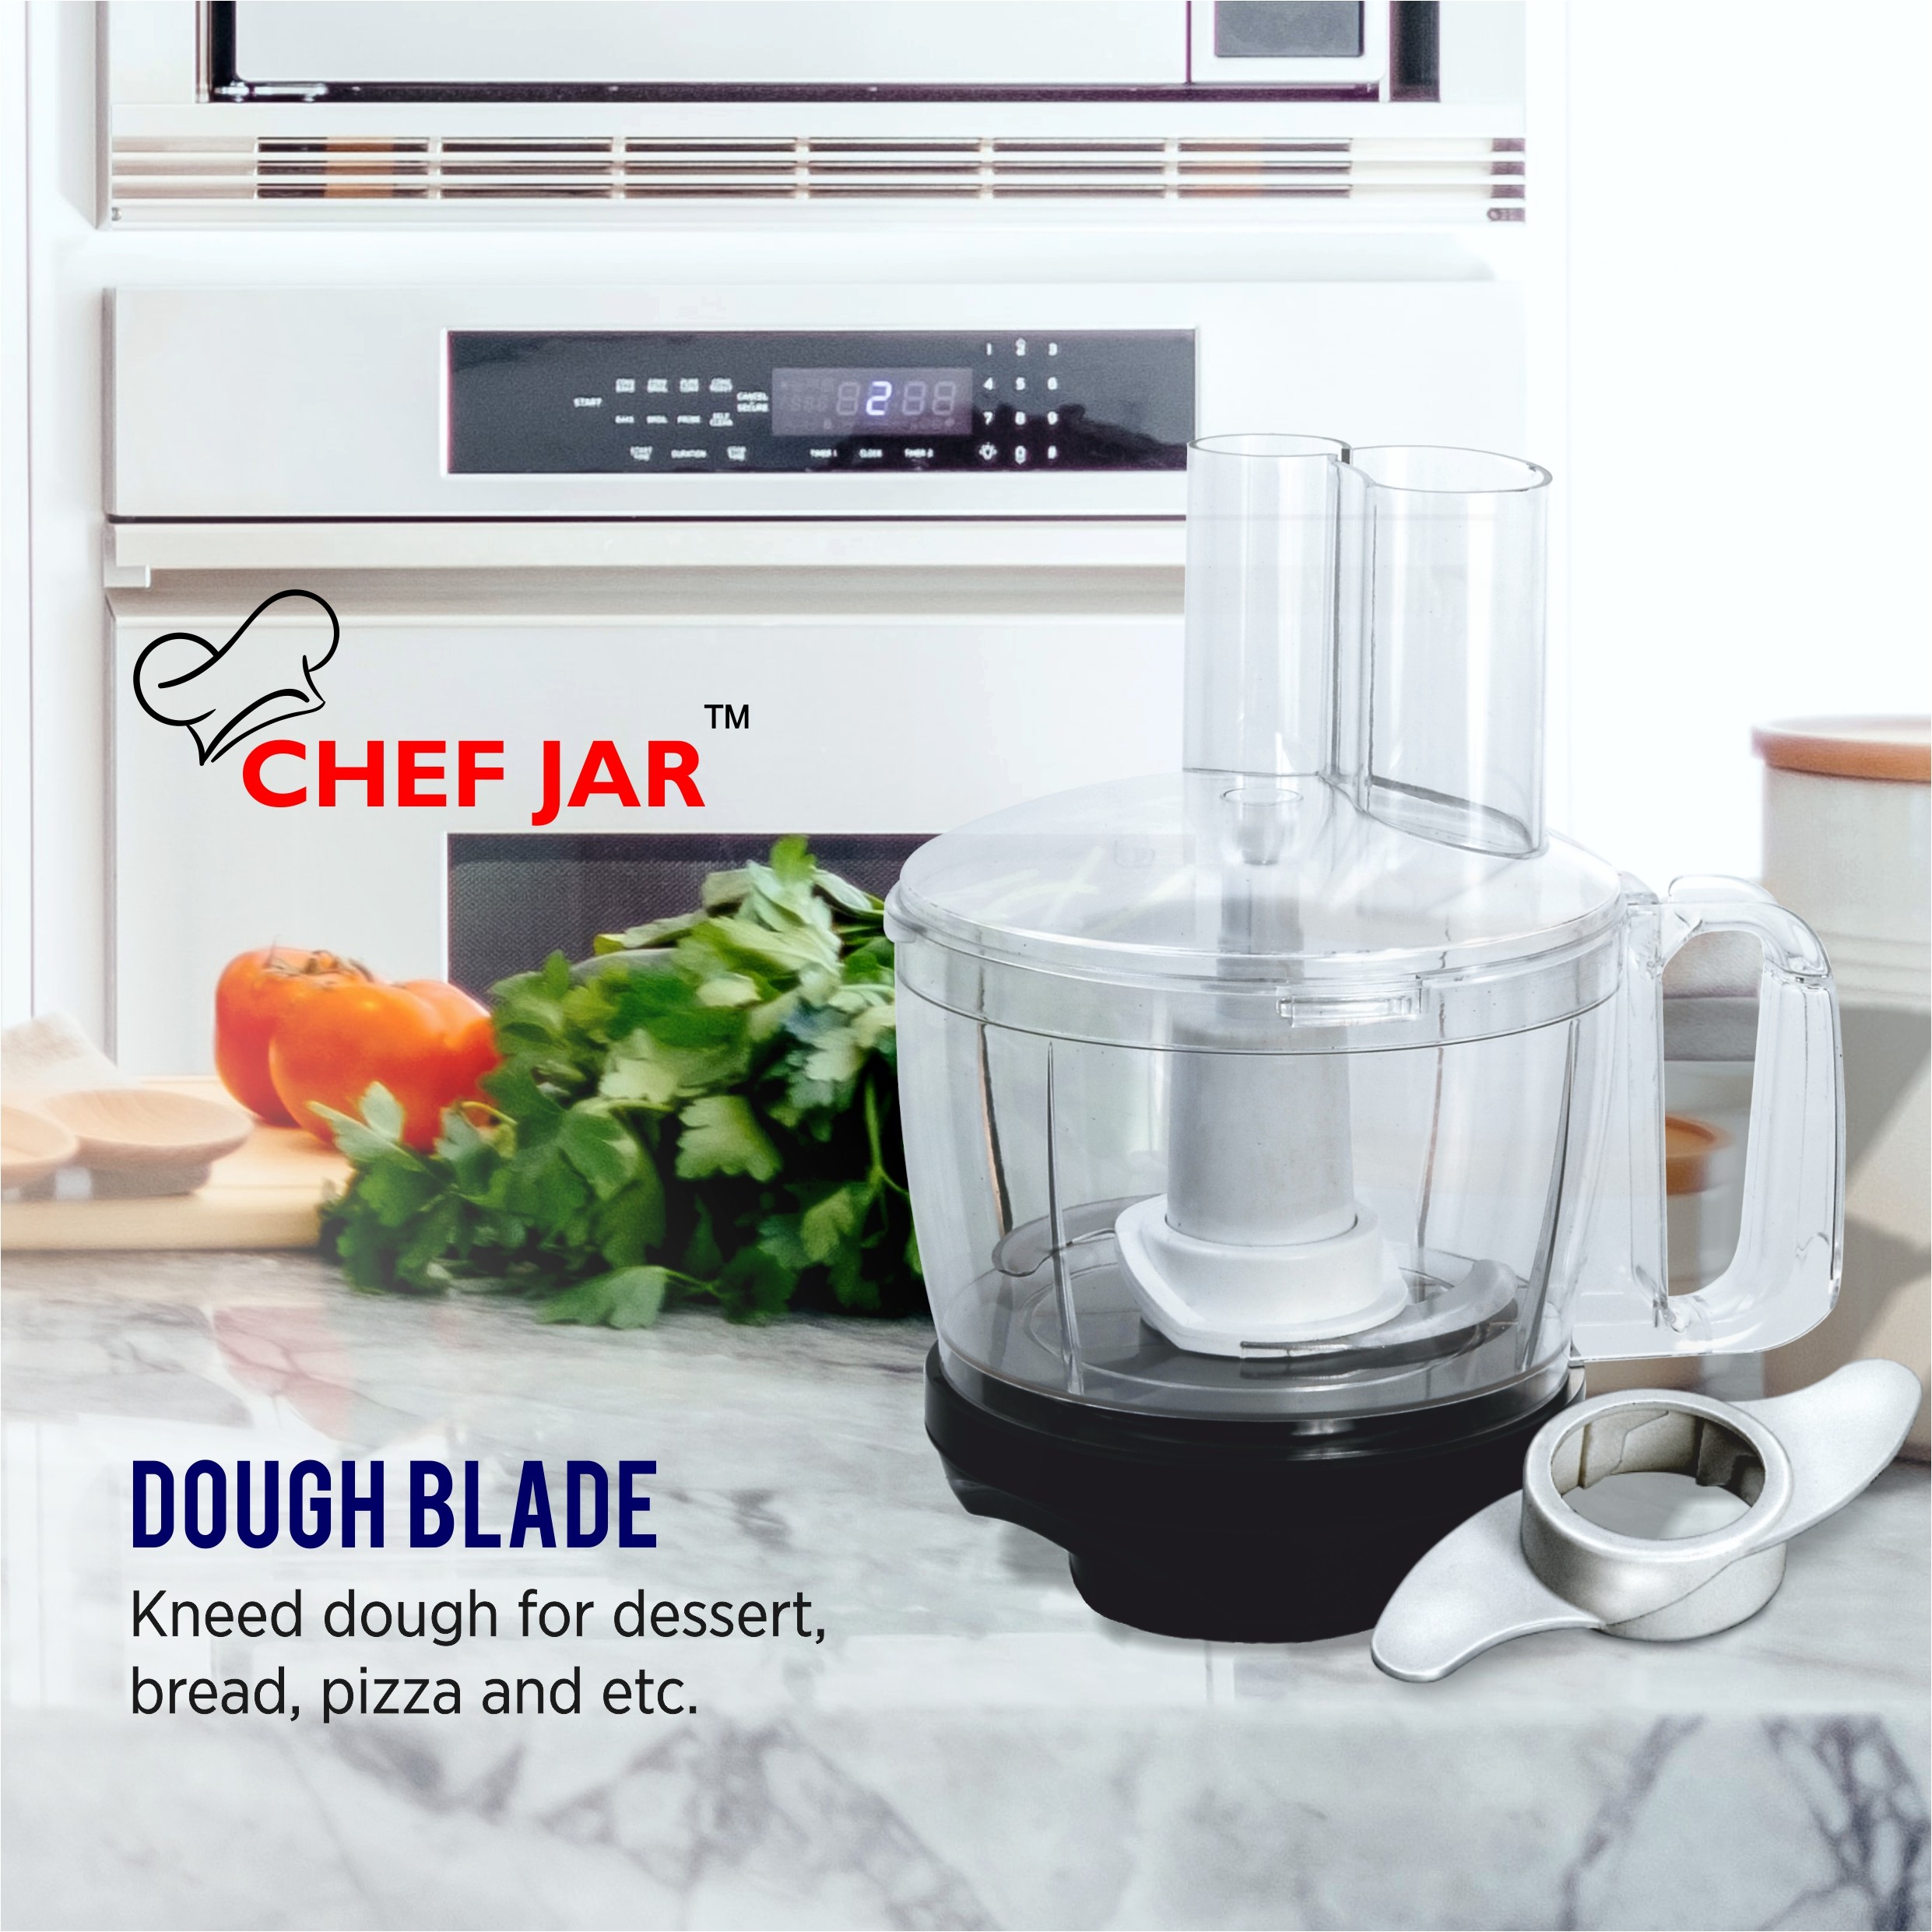 bajaj-classic-pro-600w-indian-mixer-grinder-with-special-chef-jar-stainless-steel-jars-indian-mixer-grinder-spice-coffee-grinder-110v-for-use-in-canada-usa10